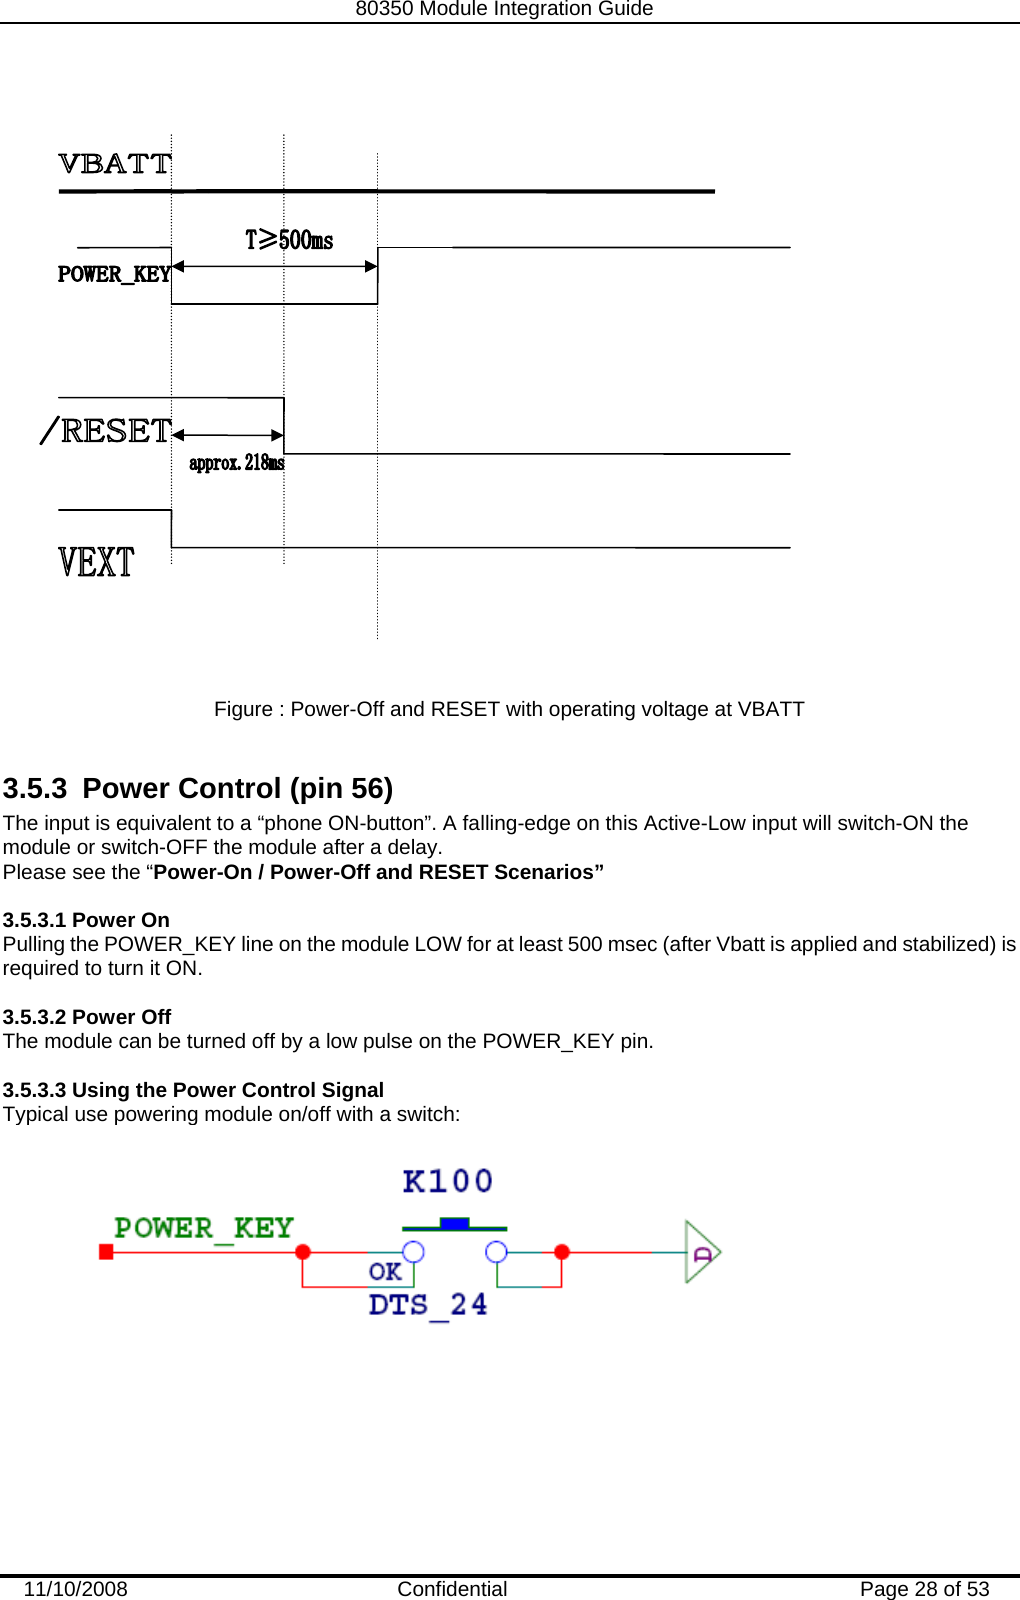   80350 Module Integration Guide  11/10/2008    Confidential  Page 28 of 53    Figure : Power-Off and RESET with operating voltage at VBATT   3.5.3  Power Control (pin 56) The input is equivalent to a “phone ON-button”. A falling-edge on this Active-Low input will switch-ON the module or switch-OFF the module after a delay.  Please see the “Power-On / Power-Off and RESET Scenarios”  3.5.3.1 Power On Pulling the POWER_KEY line on the module LOW for at least 500 msec (after Vbatt is applied and stabilized) is required to turn it ON.  3.5.3.2 Power Off The module can be turned off by a low pulse on the POWER_KEY pin.  3.5.3.3 Using the Power Control Signal  Typical use powering module on/off with a switch:  